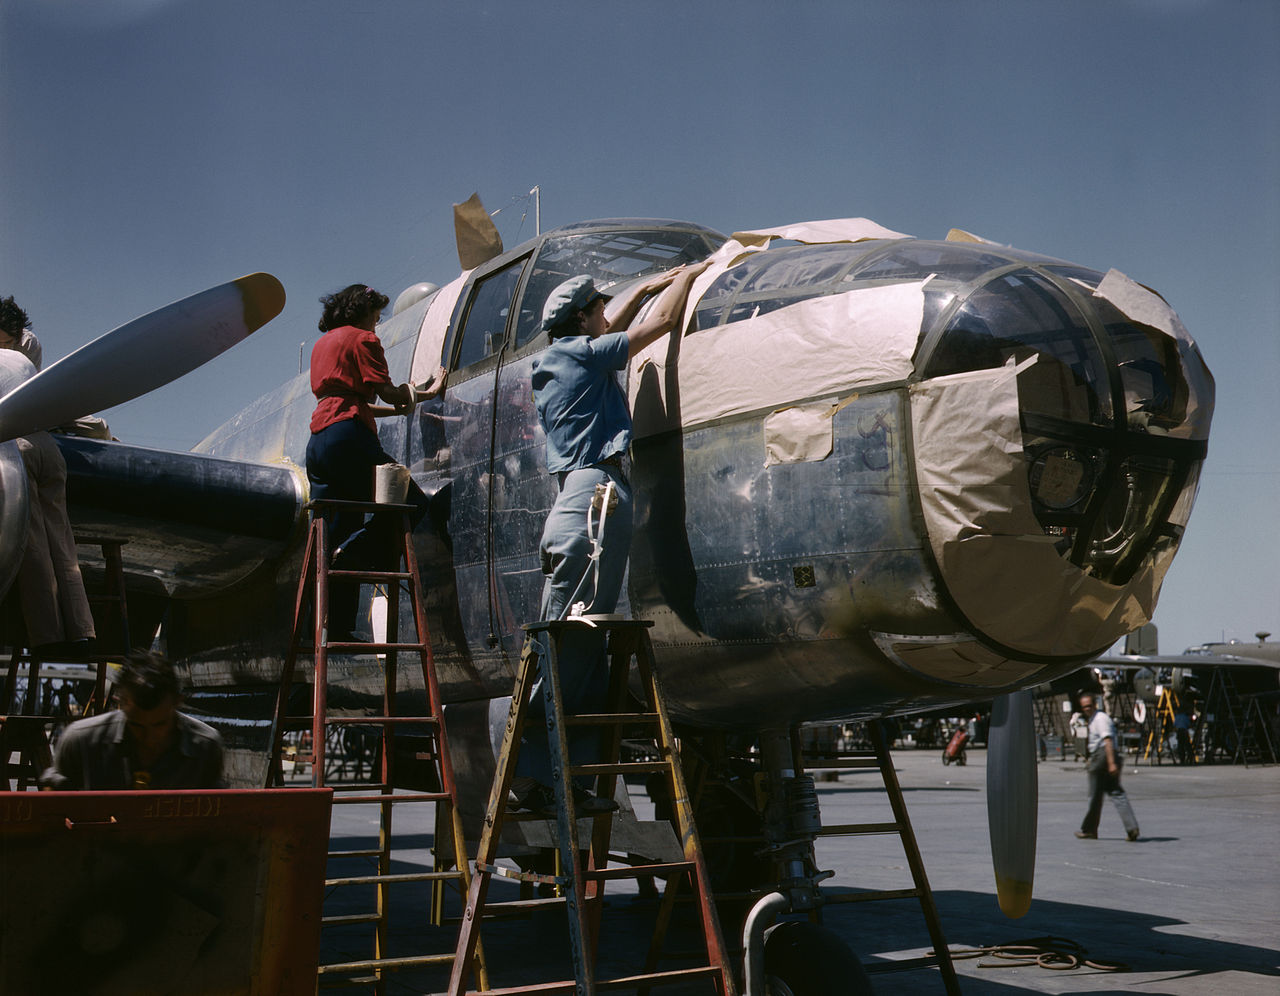 North American B-25 bomber is prepared for painting on the outside assembly line, North American Aviation, Inc., Inglewood, Calif